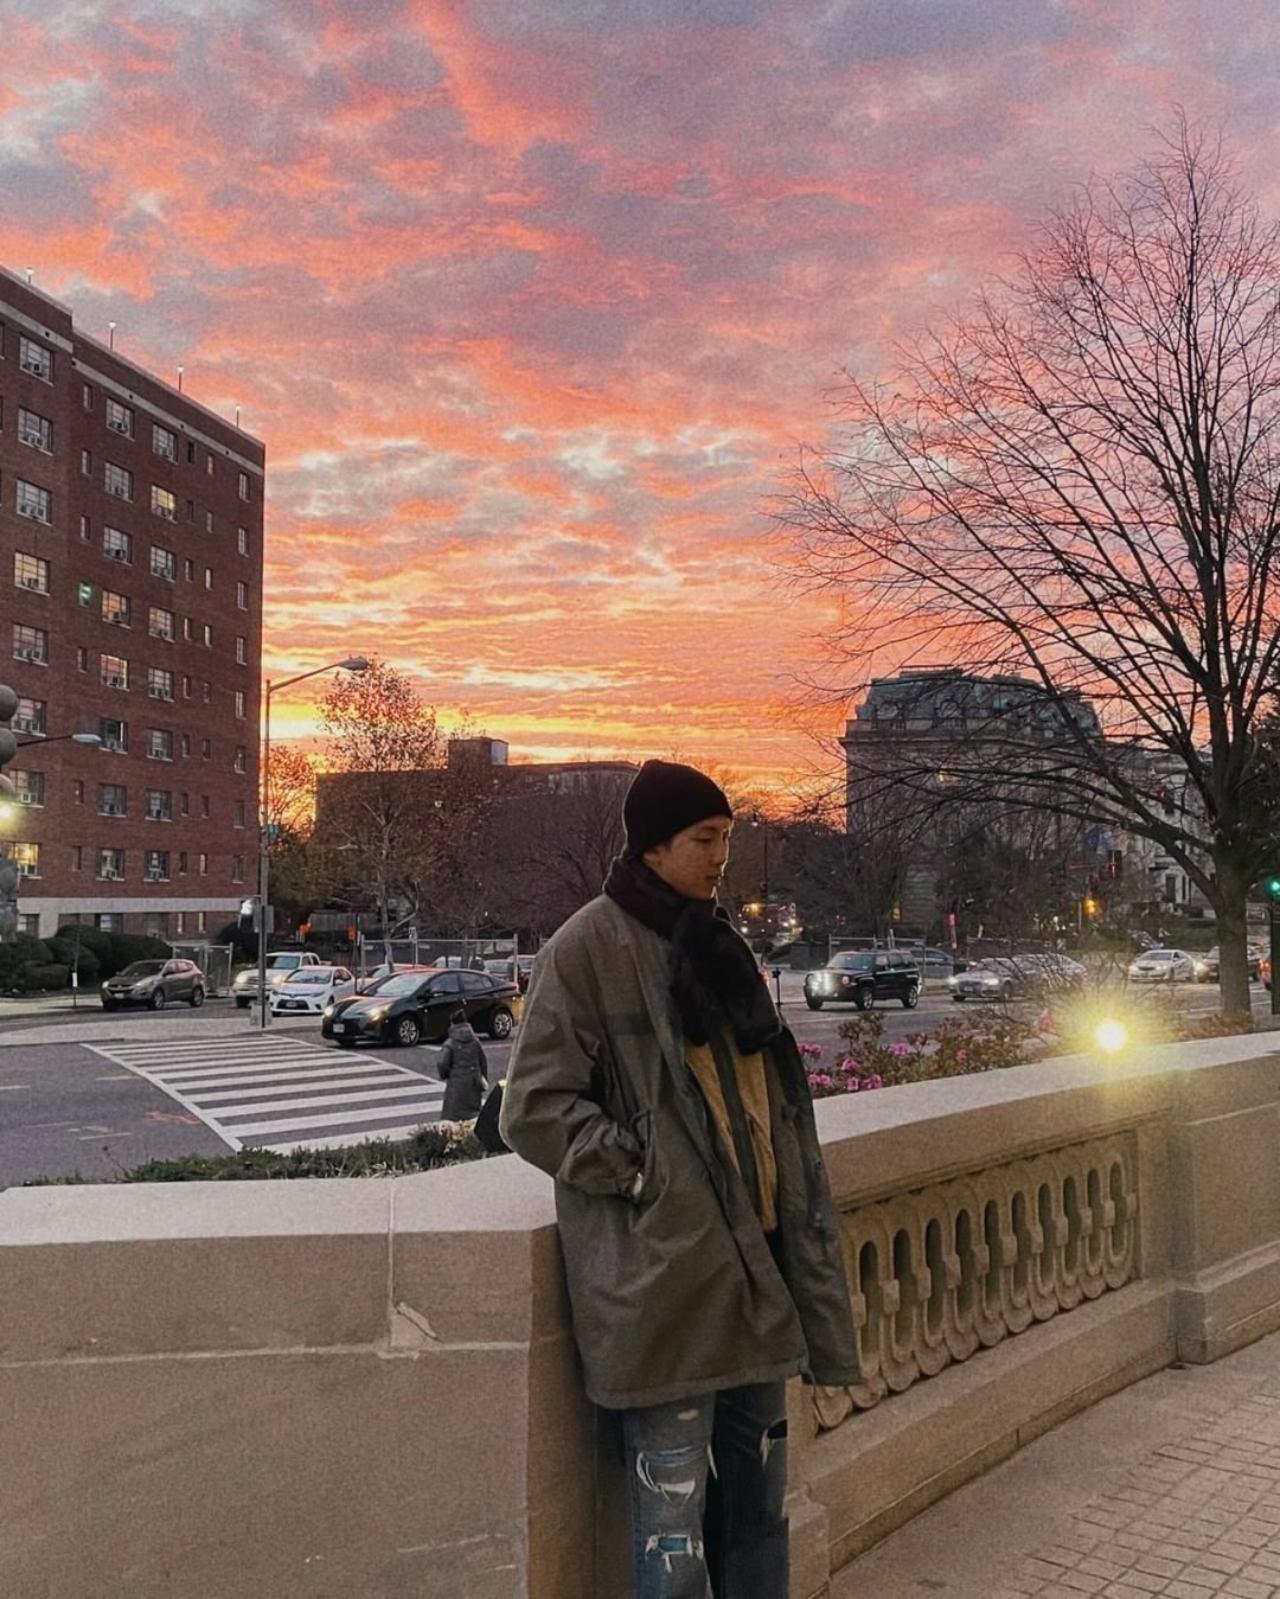 Born on 12th September, 1994, Namjoon's zodiac sign is a Virgo, which is an earth element. It seems like the BTS leader's style preferences align perfectly with his innate earthy energy. Namjoon seems to be enjoying brilliant winter sunset skies with a cosy fit